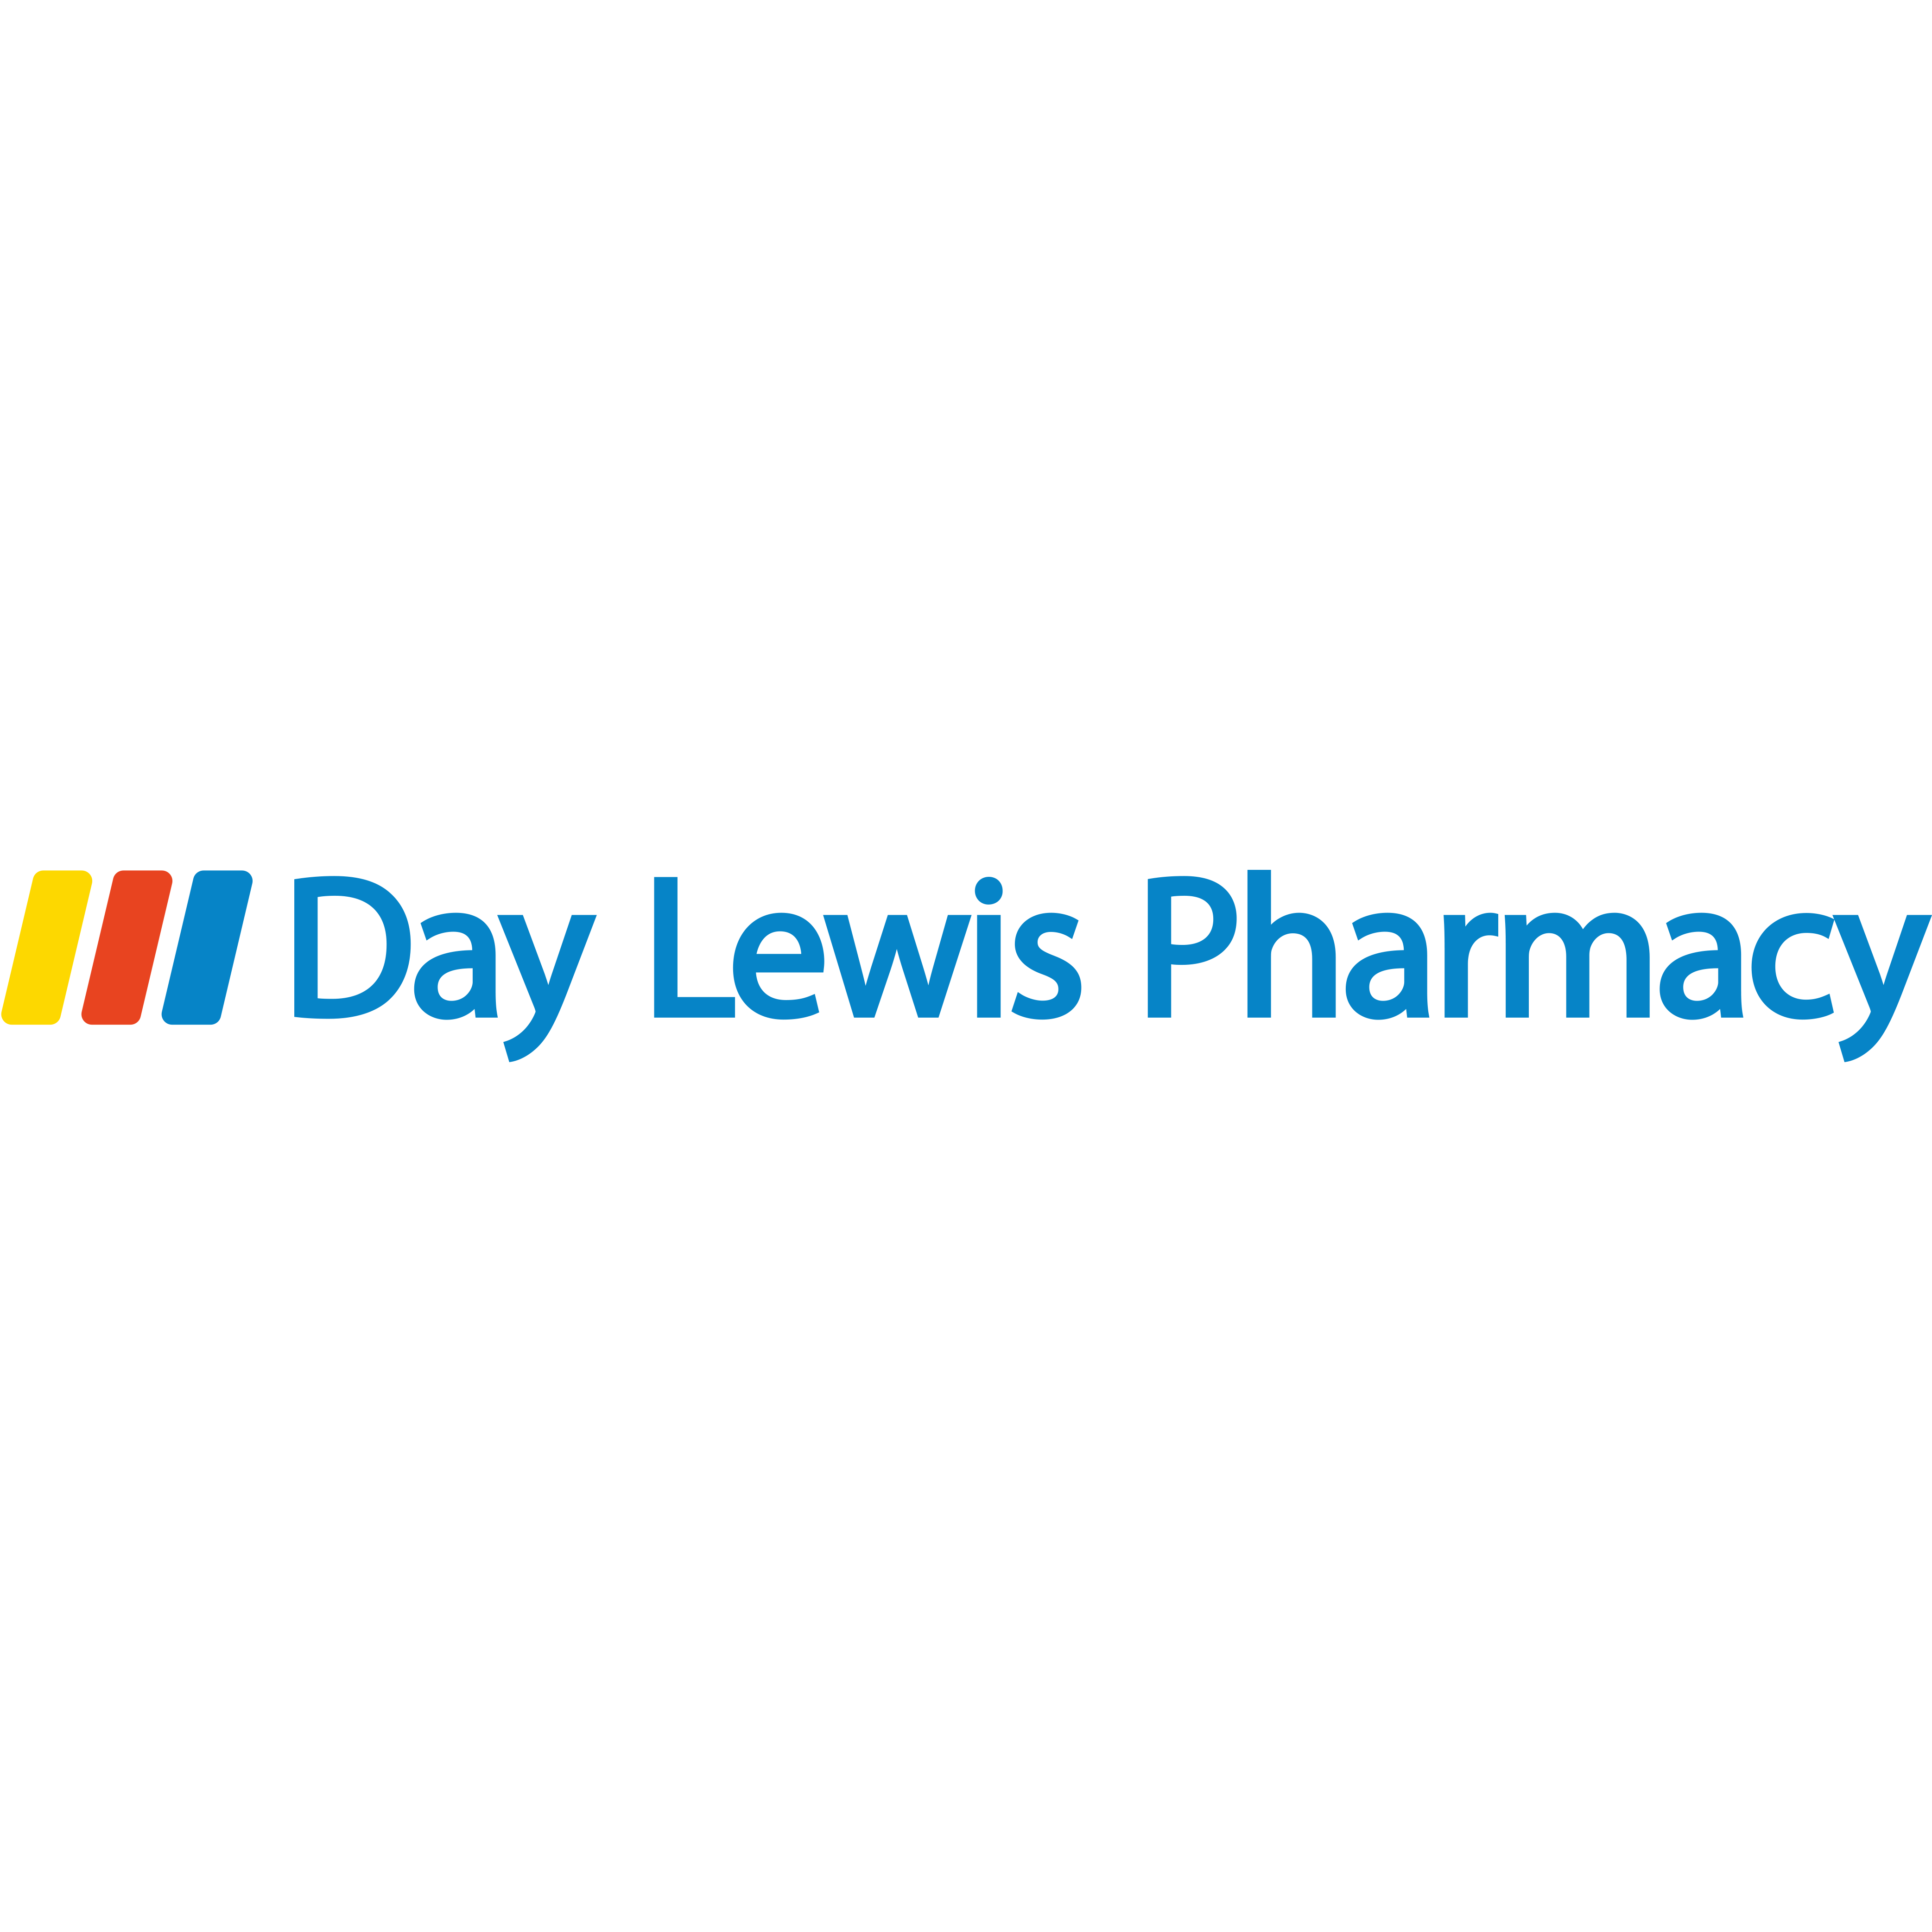 Day Lewis Pharmacy Haslemere - Haslemere, Surrey GU27 2BQ - 01428 656143 | ShowMeLocal.com